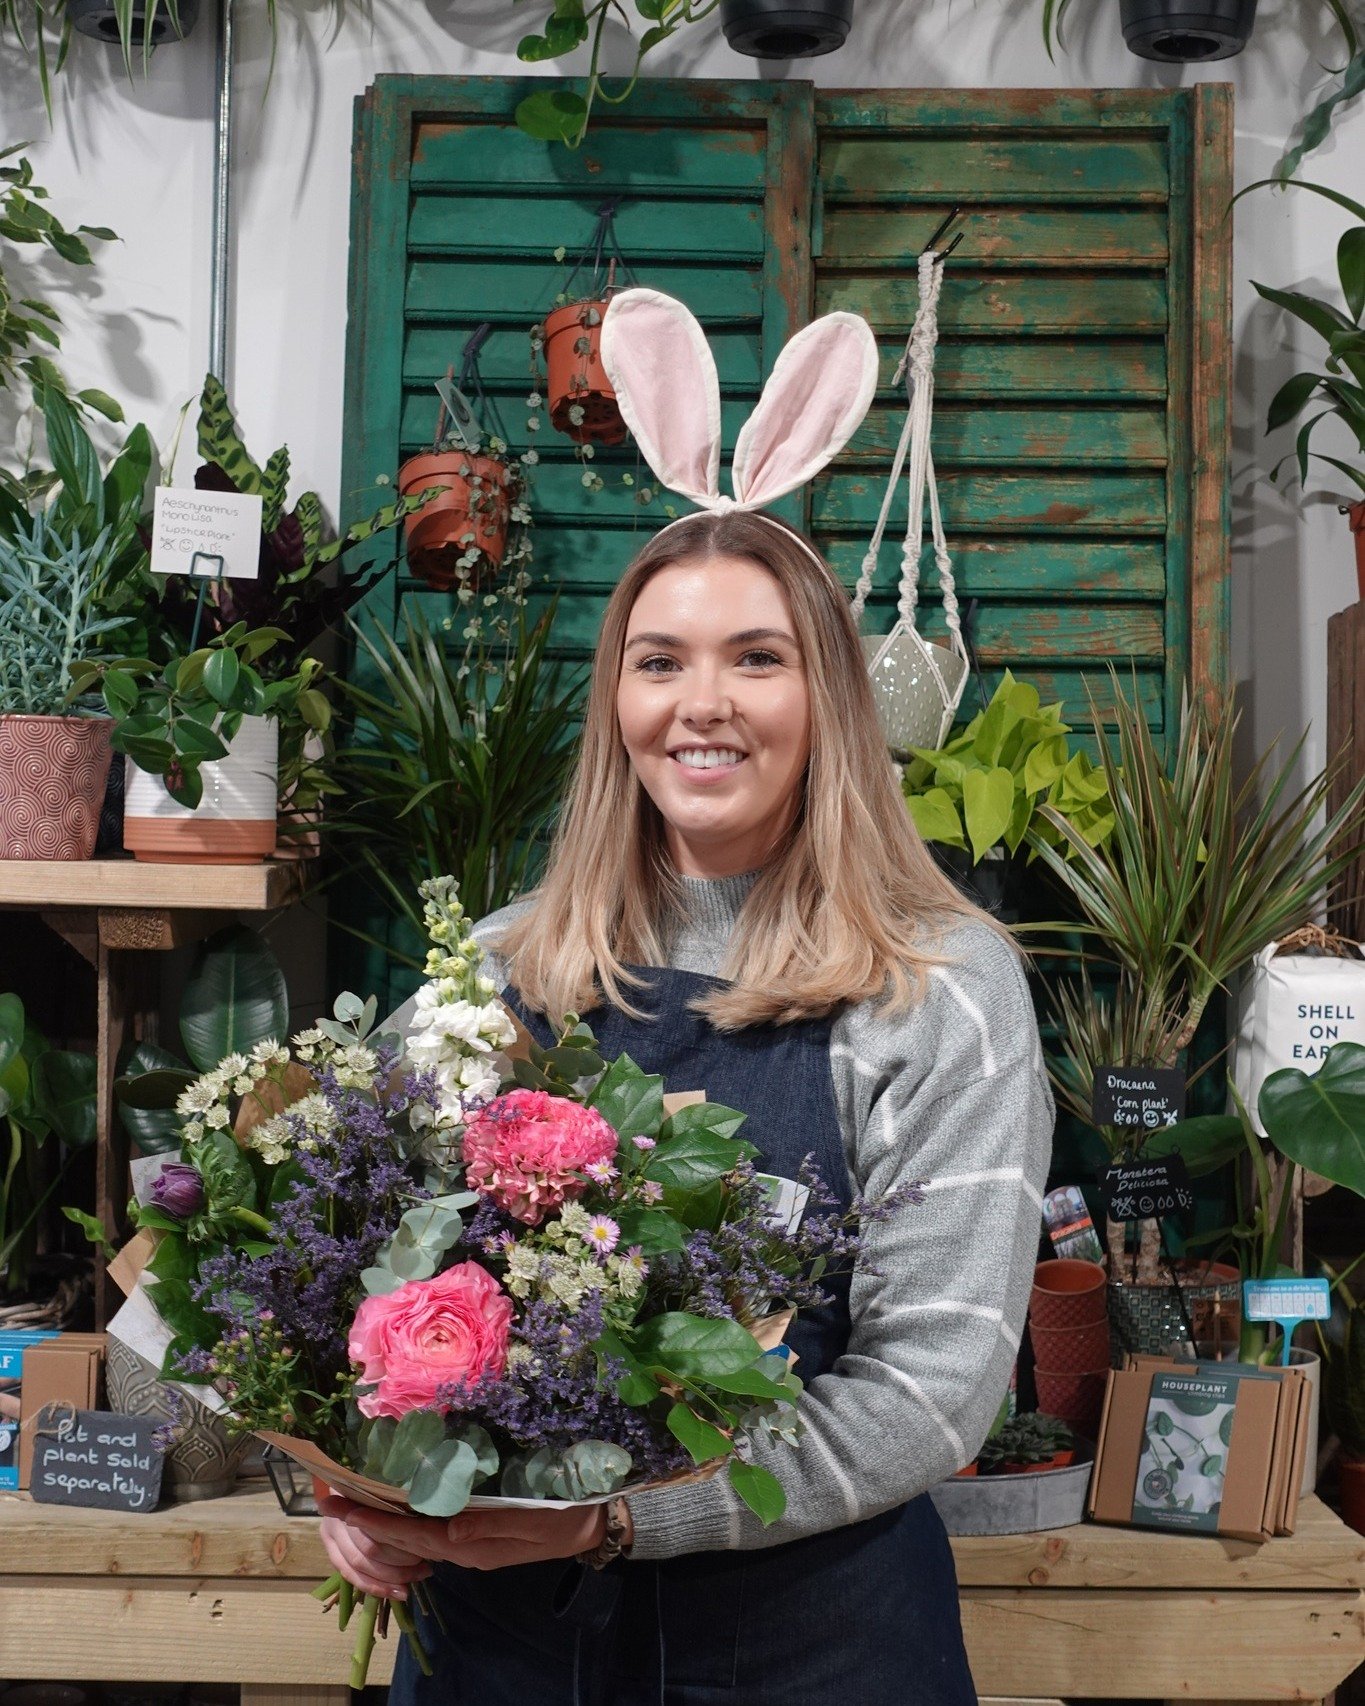 A huge, hoppy, happy Easter from our family here at Ben's Yard, to yours! 🐇❤️

We hope you have a wonderful Bank Holiday weekend and look forward to seeing you here this weekend for lots of family-friendly fun - like our enchanting kids Easter Trail